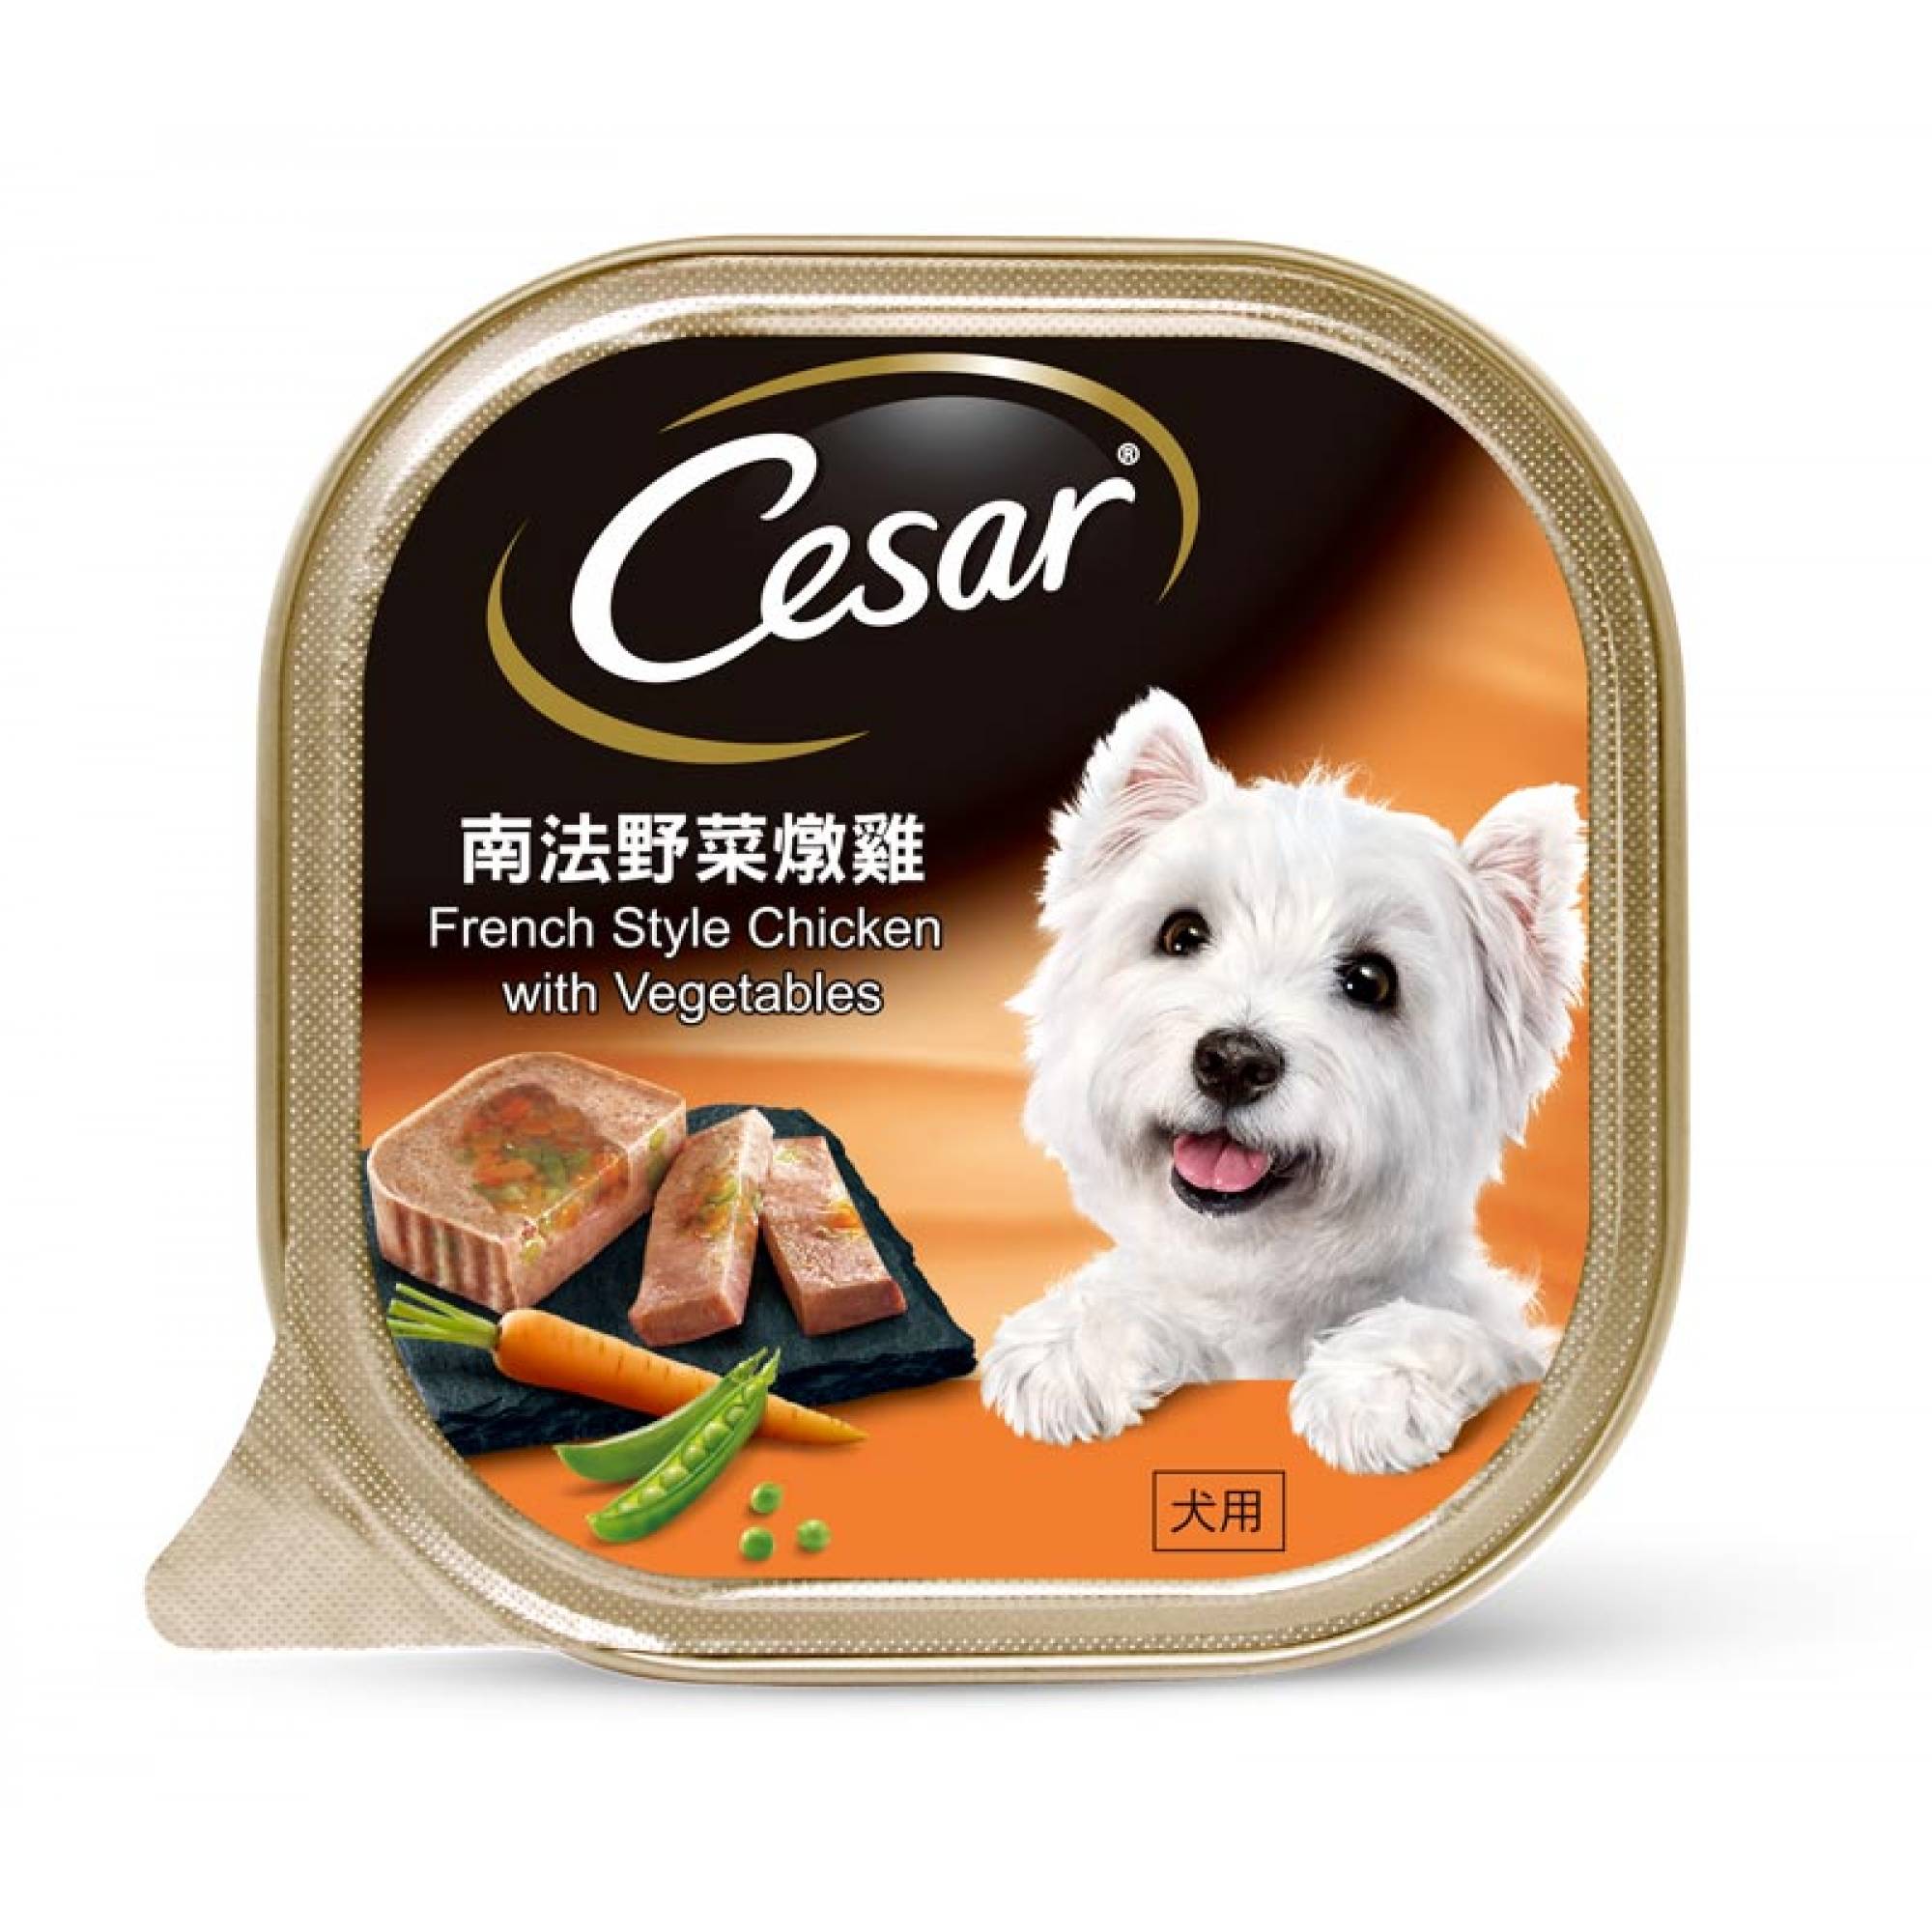 Cesar - French Style Chicken with Vegetables Pate Dog Food 100g